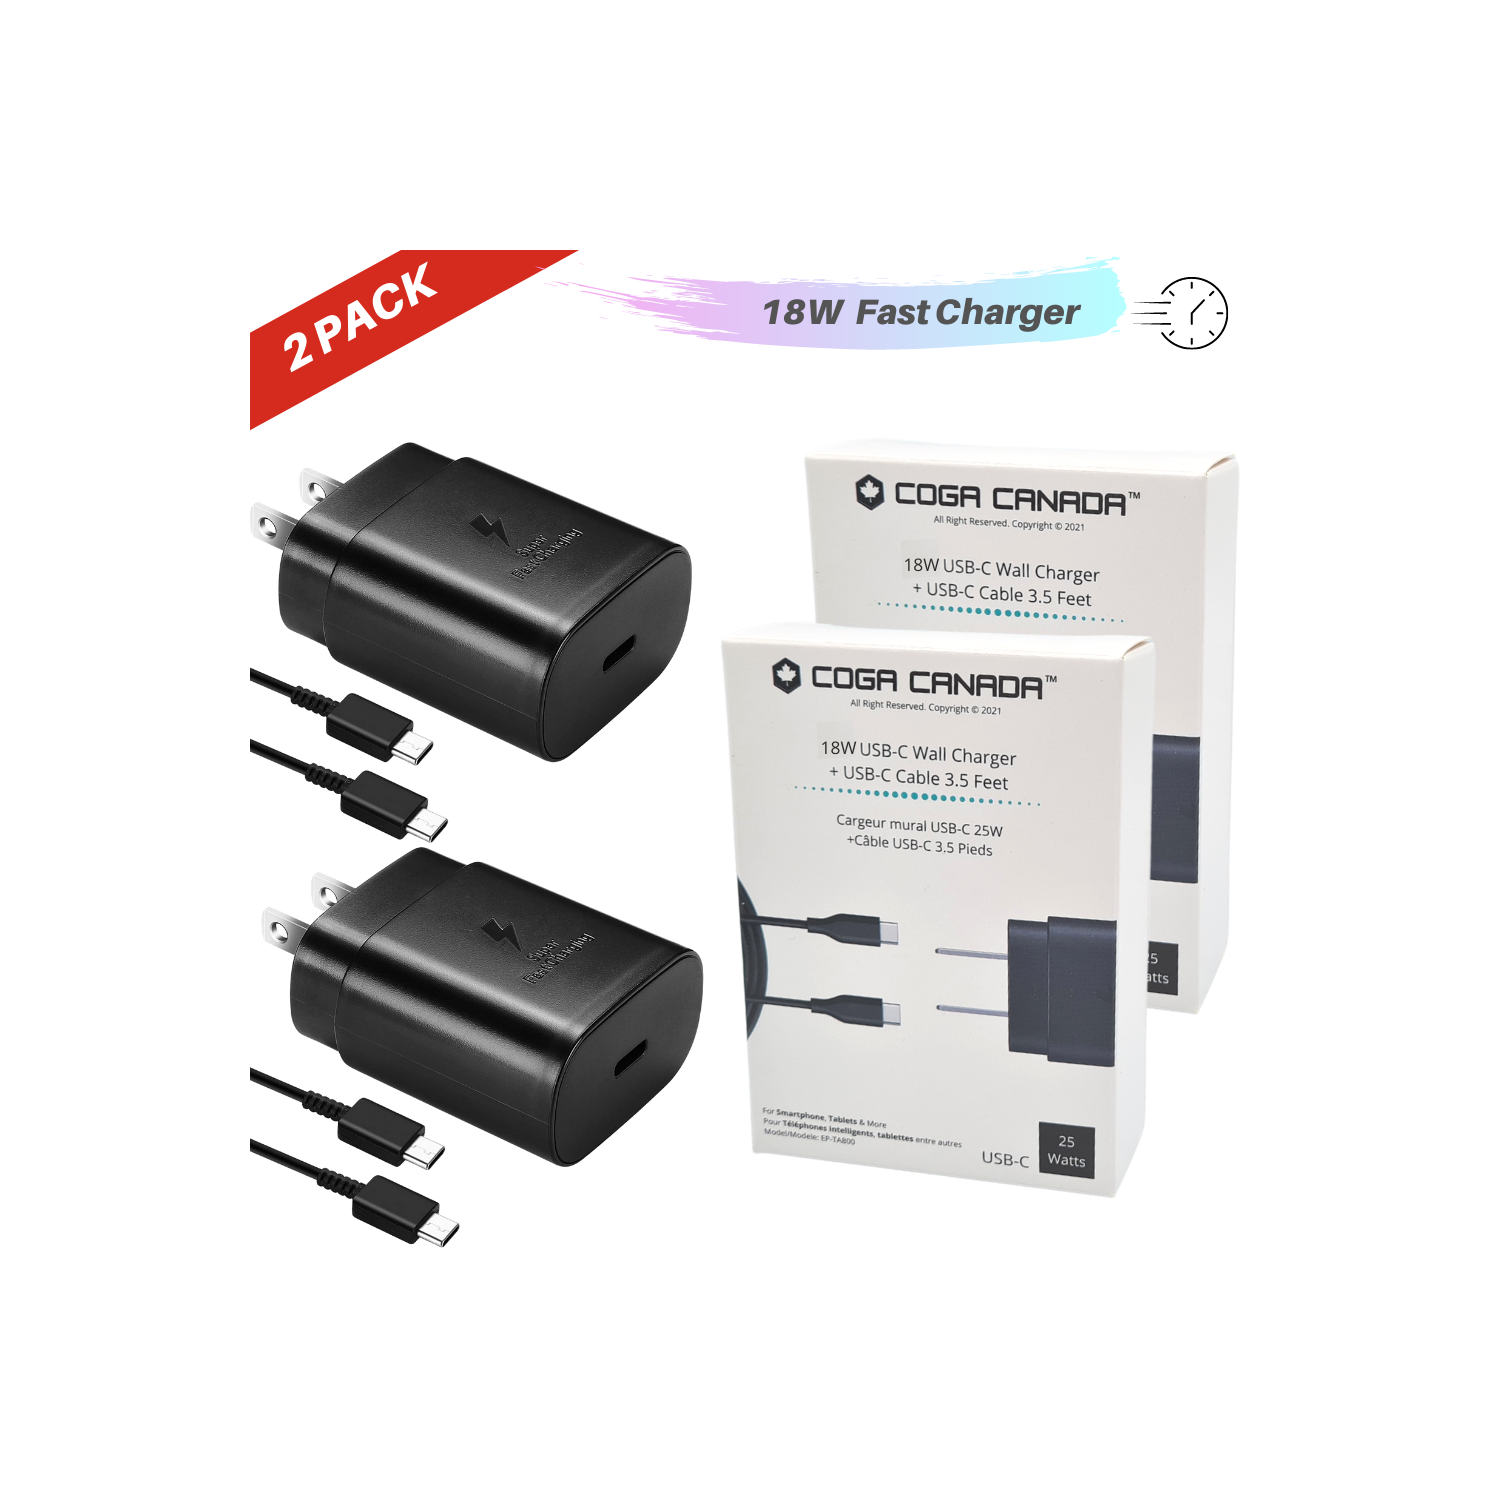 COGA Canada - [2 PACK] - 18W Super Fast Wall Charger + USB-C 3.5 Cable Samsung Galaxy S20/S21/S21+/S21Ultra/S10 5G /Note 10/Note 10 Plus/Note 20/S9 S8/S10e,iPad Pro 12.9/11,Google Pixel 3a 4 3 2 XL